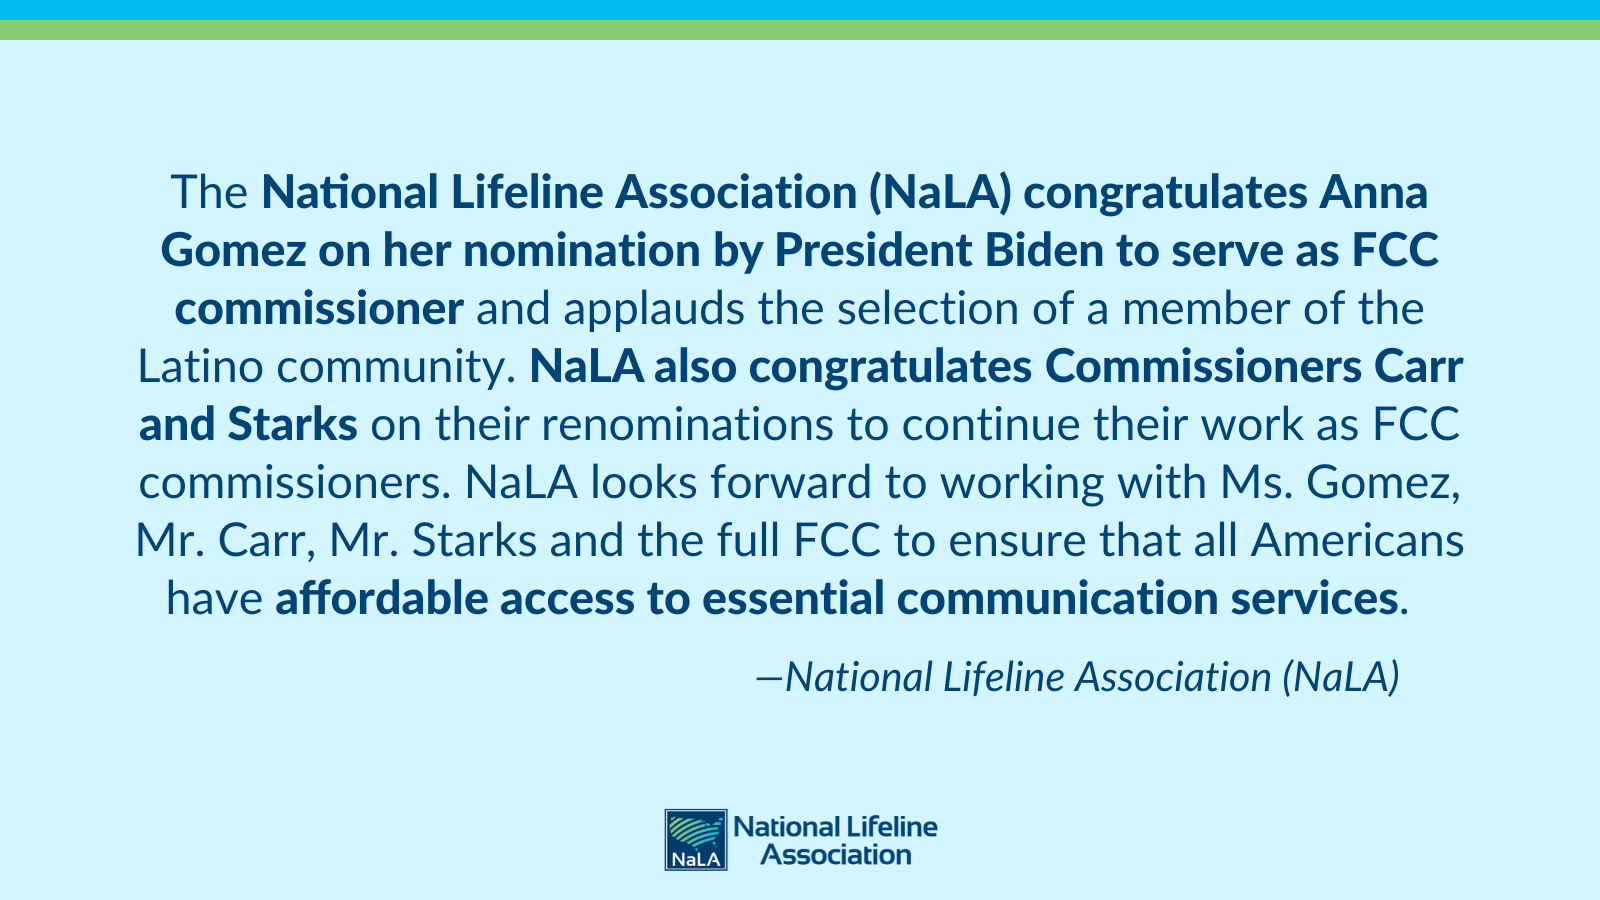 NaLA congratulates Anna Gomez, Geoffrey Starks and Brendan Carr on their nominations to the FCC